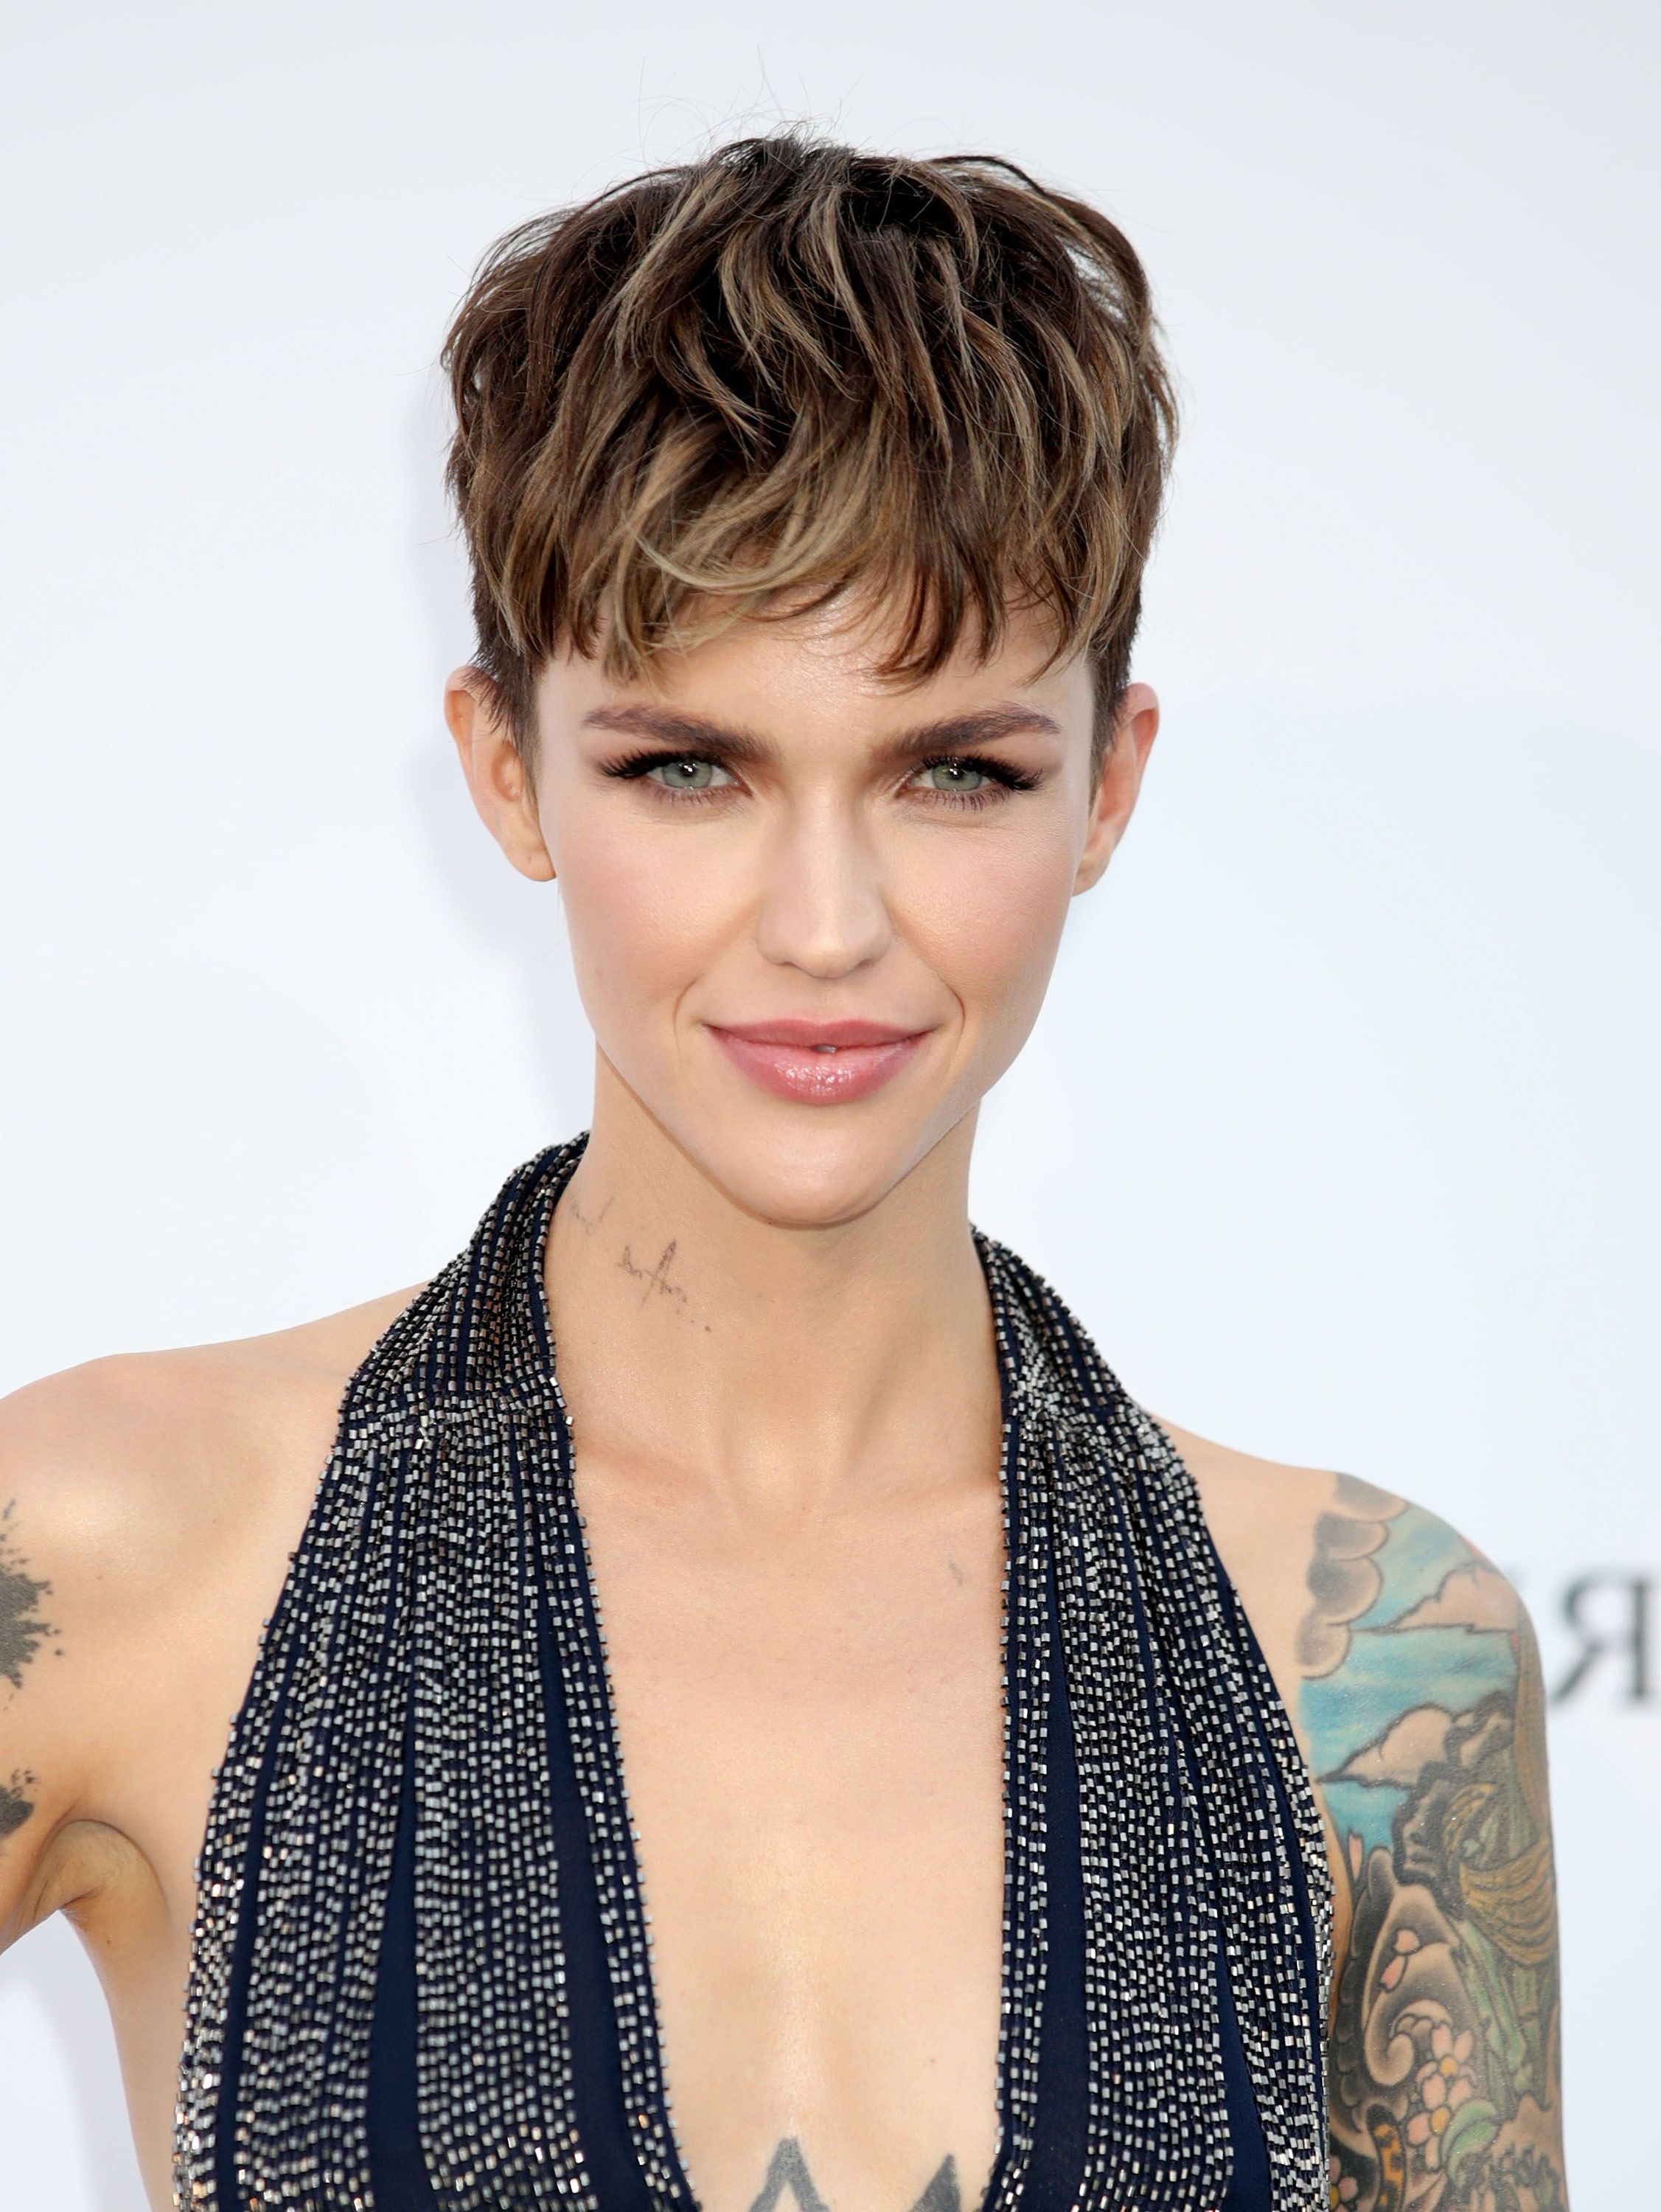 70 Best Pixie Cut Hairstyle Ideas 2019 – Cute Celebrity Pertaining To Highlighted Pixie Hairstyles (View 20 of 20)